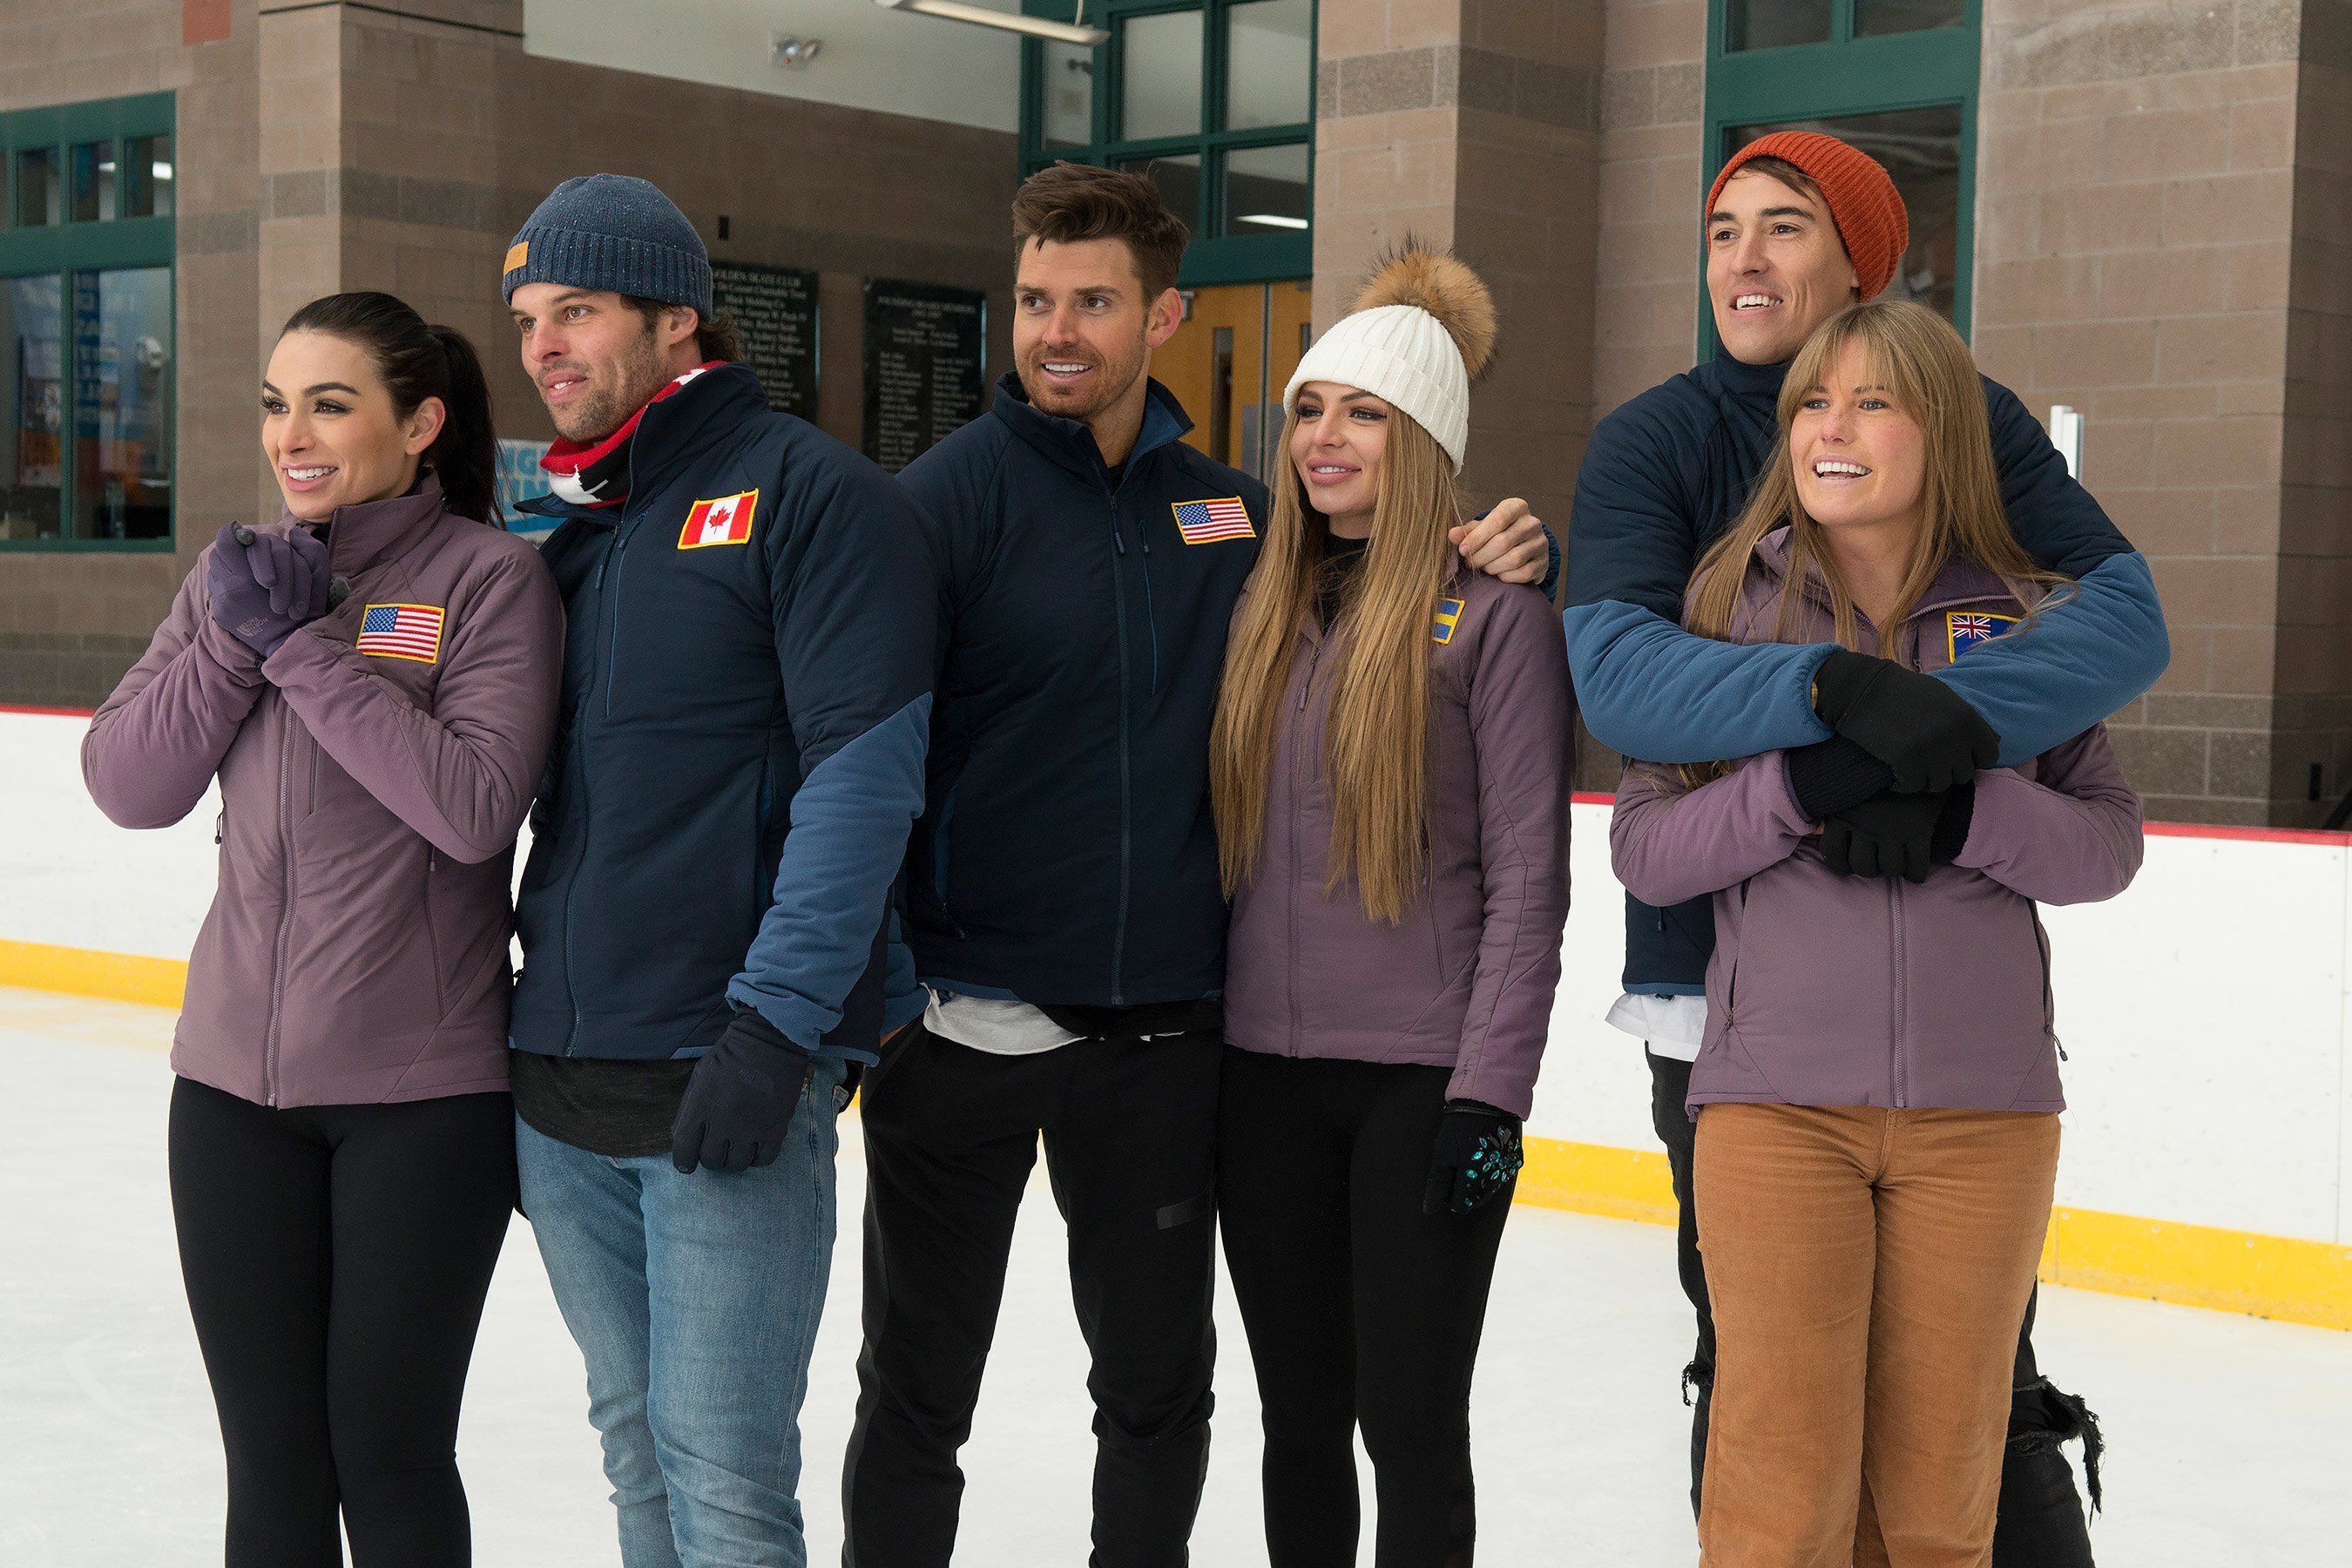 THE BACHELOR WINTER GAMES - “Episode 104” - It’s the final countdown for the remaining couples who will face off in the final event – Couples Ice Dancing. As this journey comes to an end, feelings grow deeper and bonds become stronger on the season finale of “The Bachelor Winter Games,” airing THURSDAY, FEB. 22 (8:00-10:00 p.m. EST), on The ABC Television Network. (ABC/Lorenzo Bevilaqua)